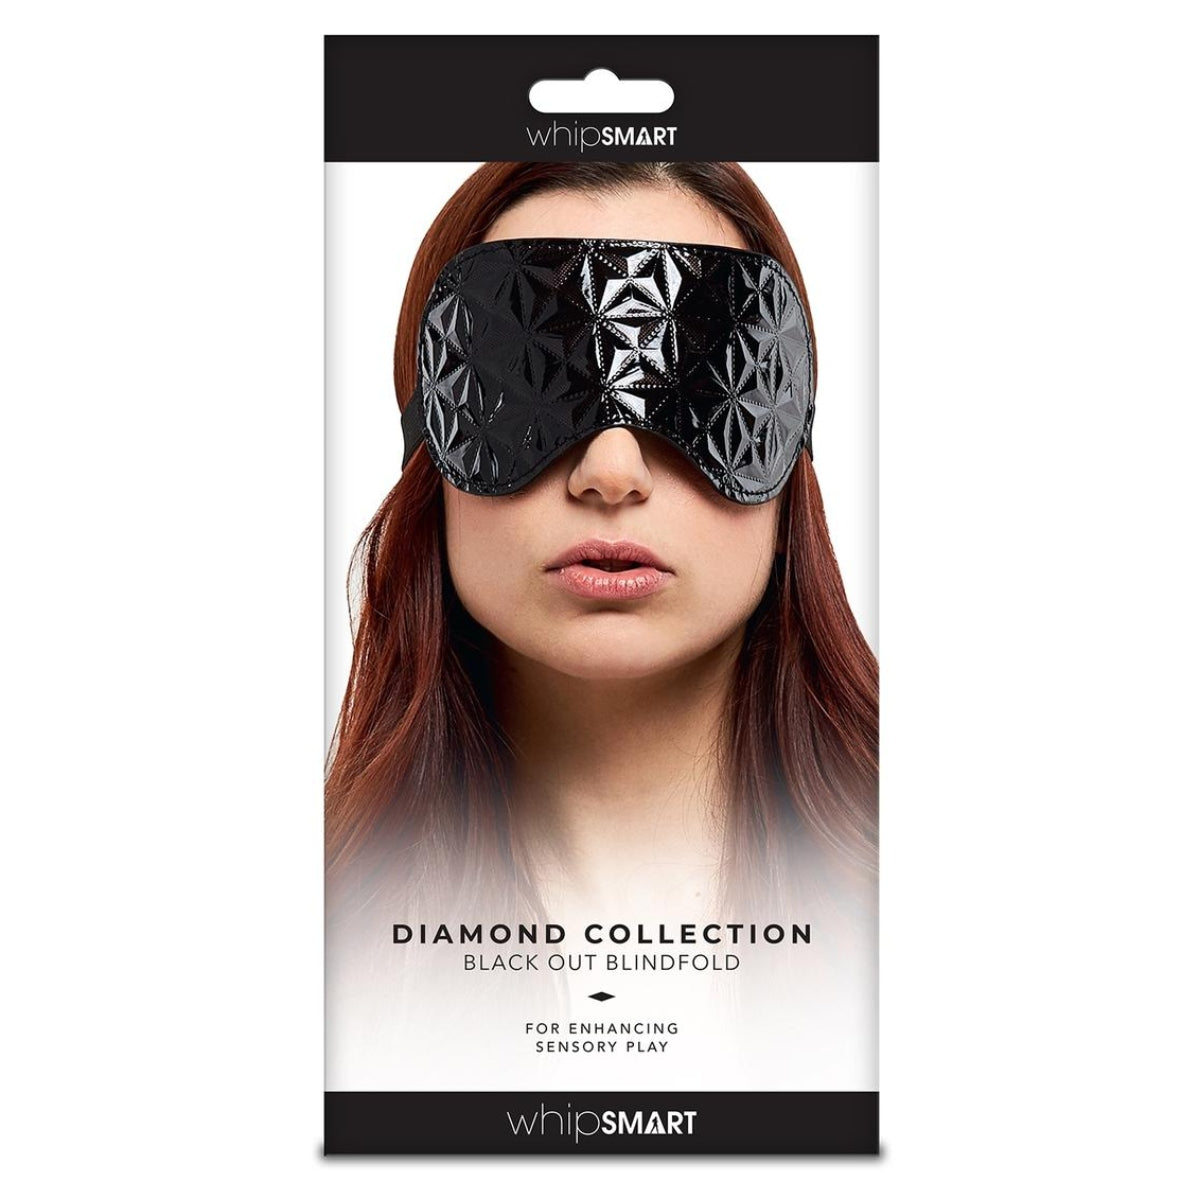 Whipsmart Diamond Collection Black Out Blindfold Black